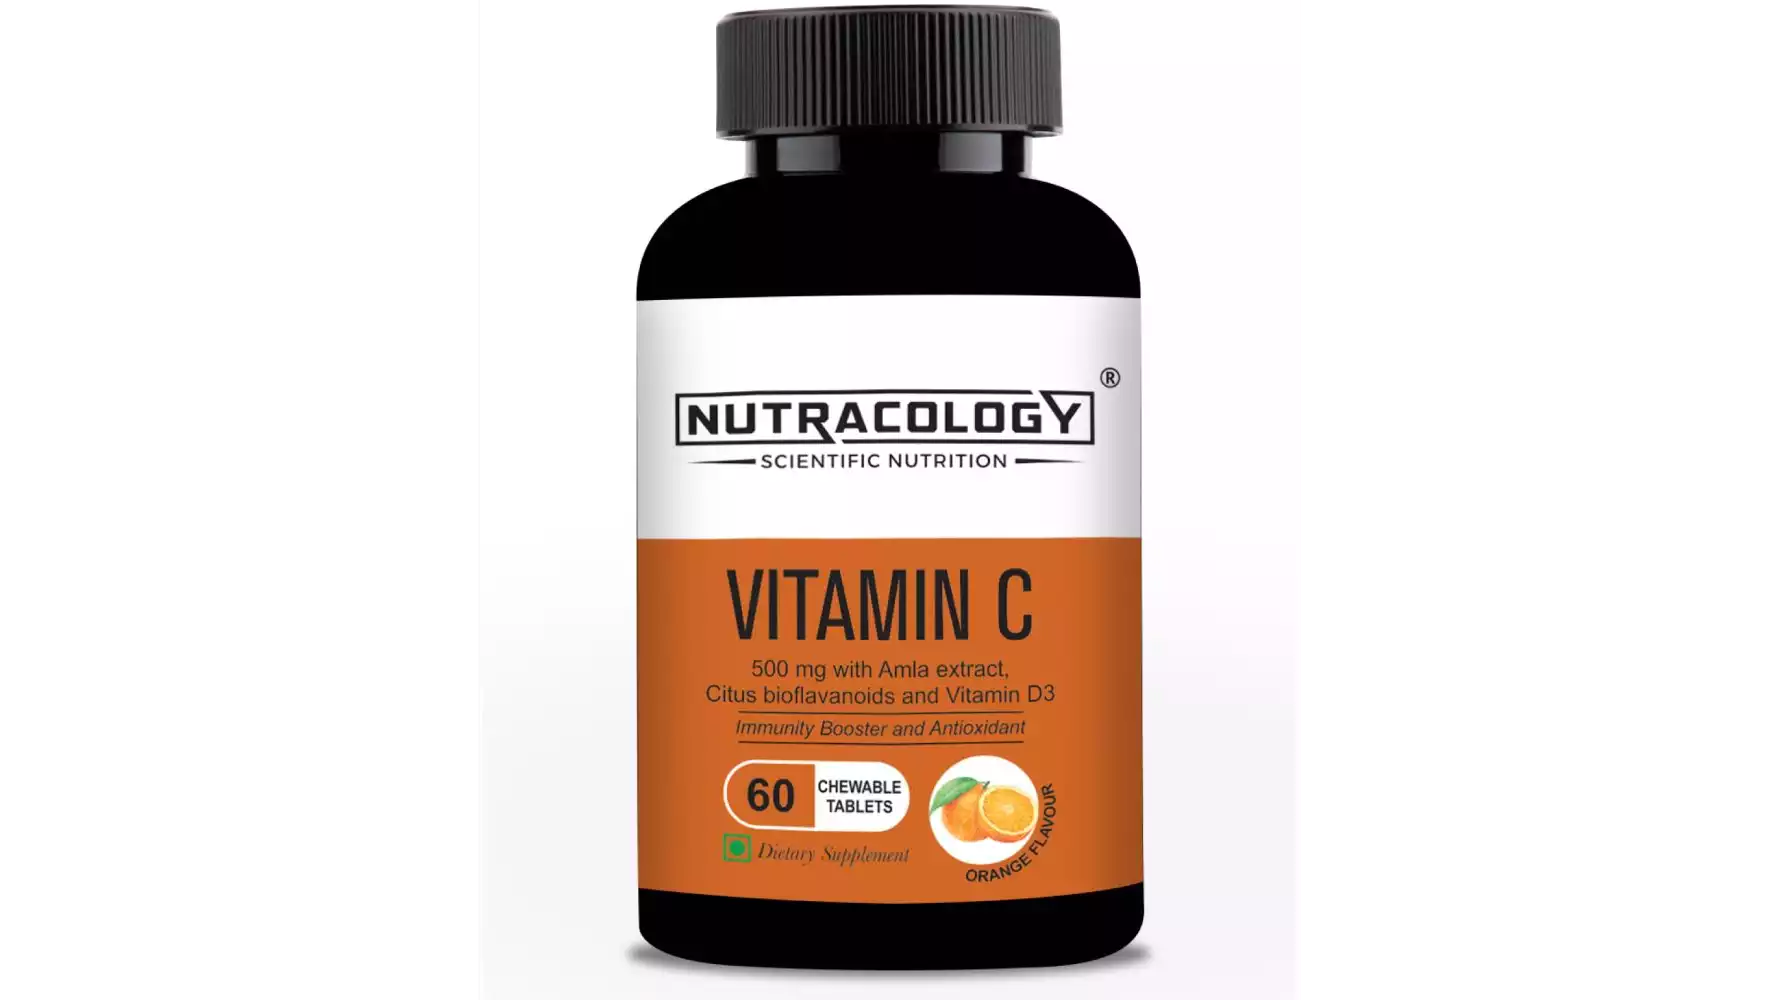 Nutracology Vitamin C 500Mg Orange Flavour Chewable Tablets (60tab)